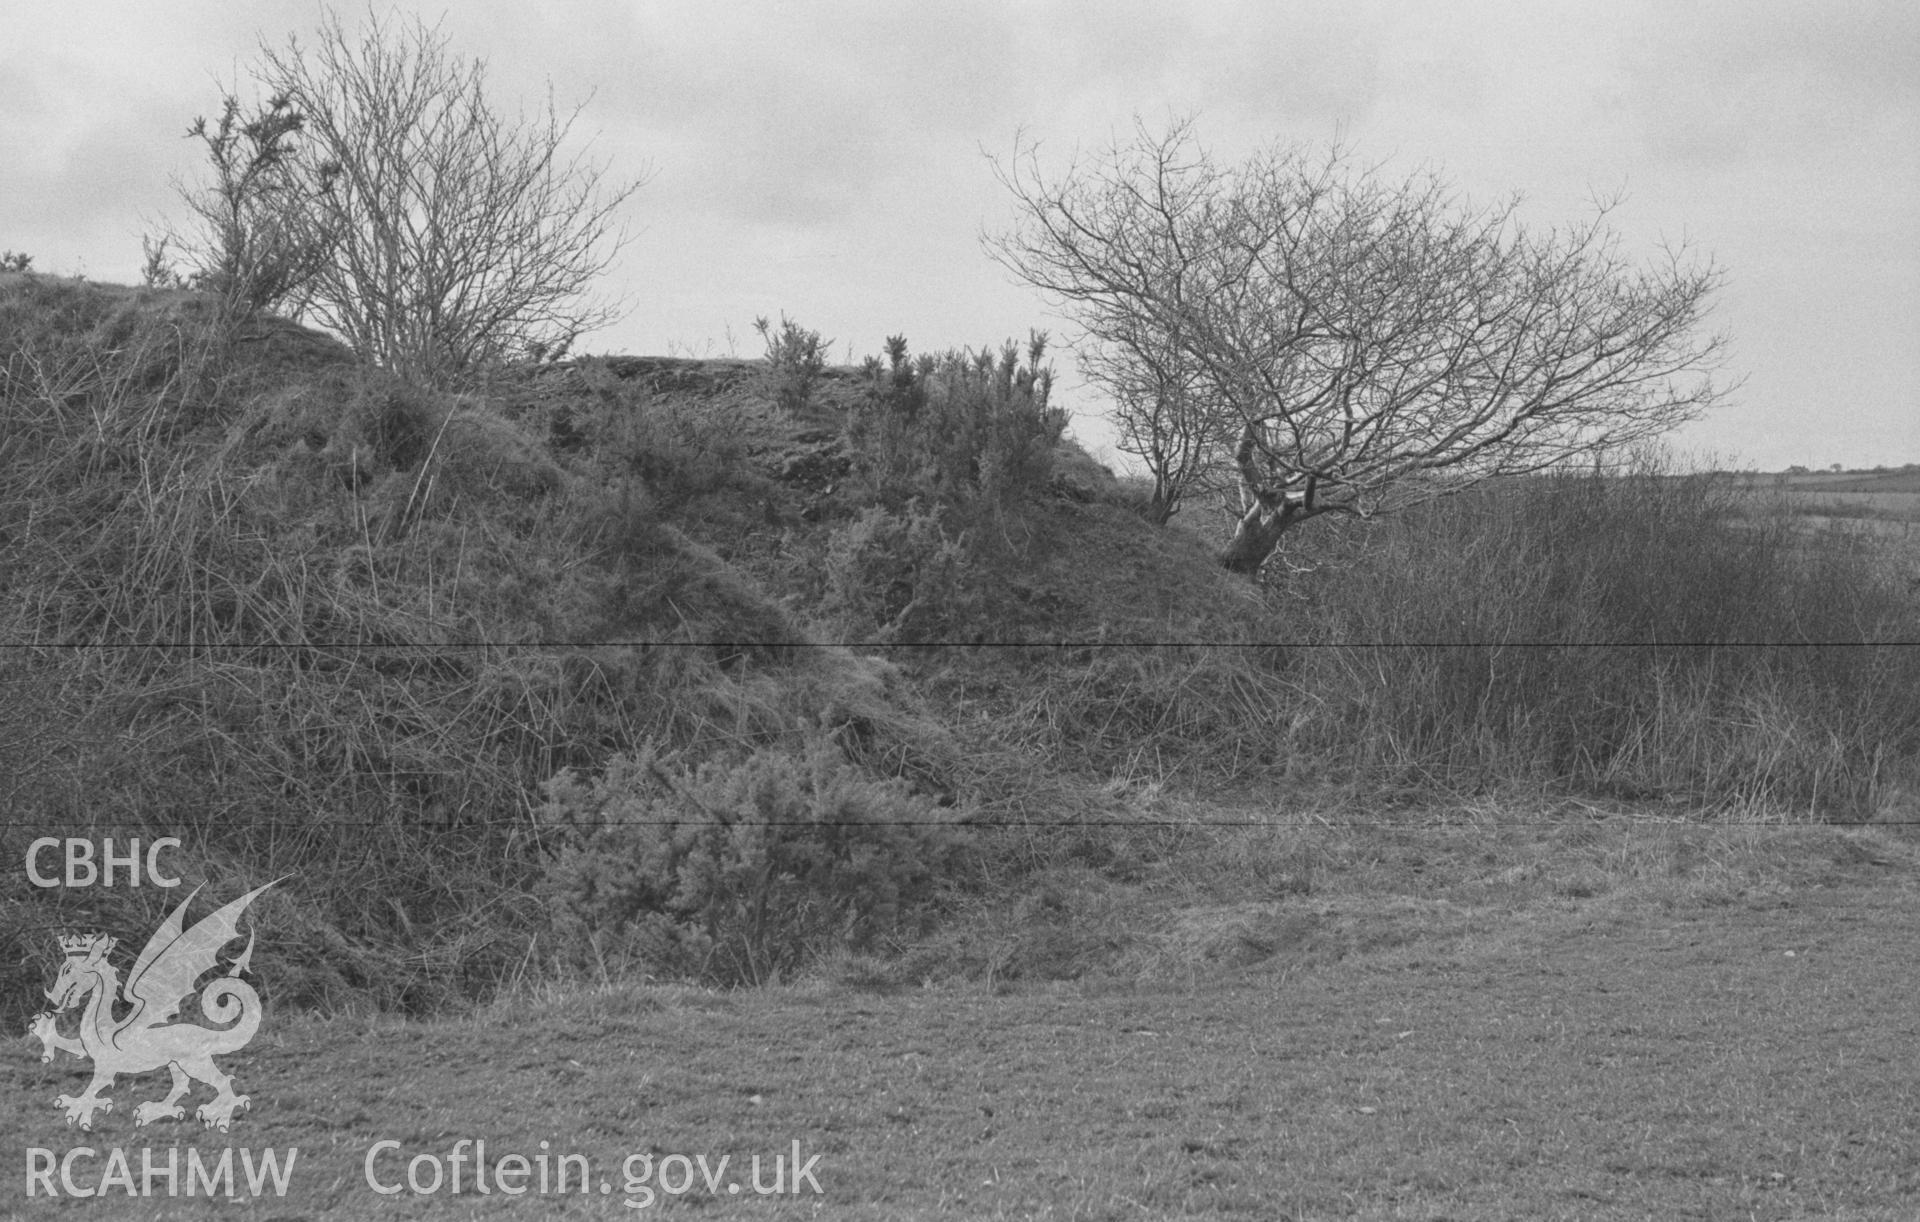 Digital copy of a black and white negative showing the Norman motte 100m north east of the site of St Mary's church, Llanfair Trefhelygen. Photographed in April 1963 by Arthur O. Chater from Grid Reference SN 3444 4421, looking north west.